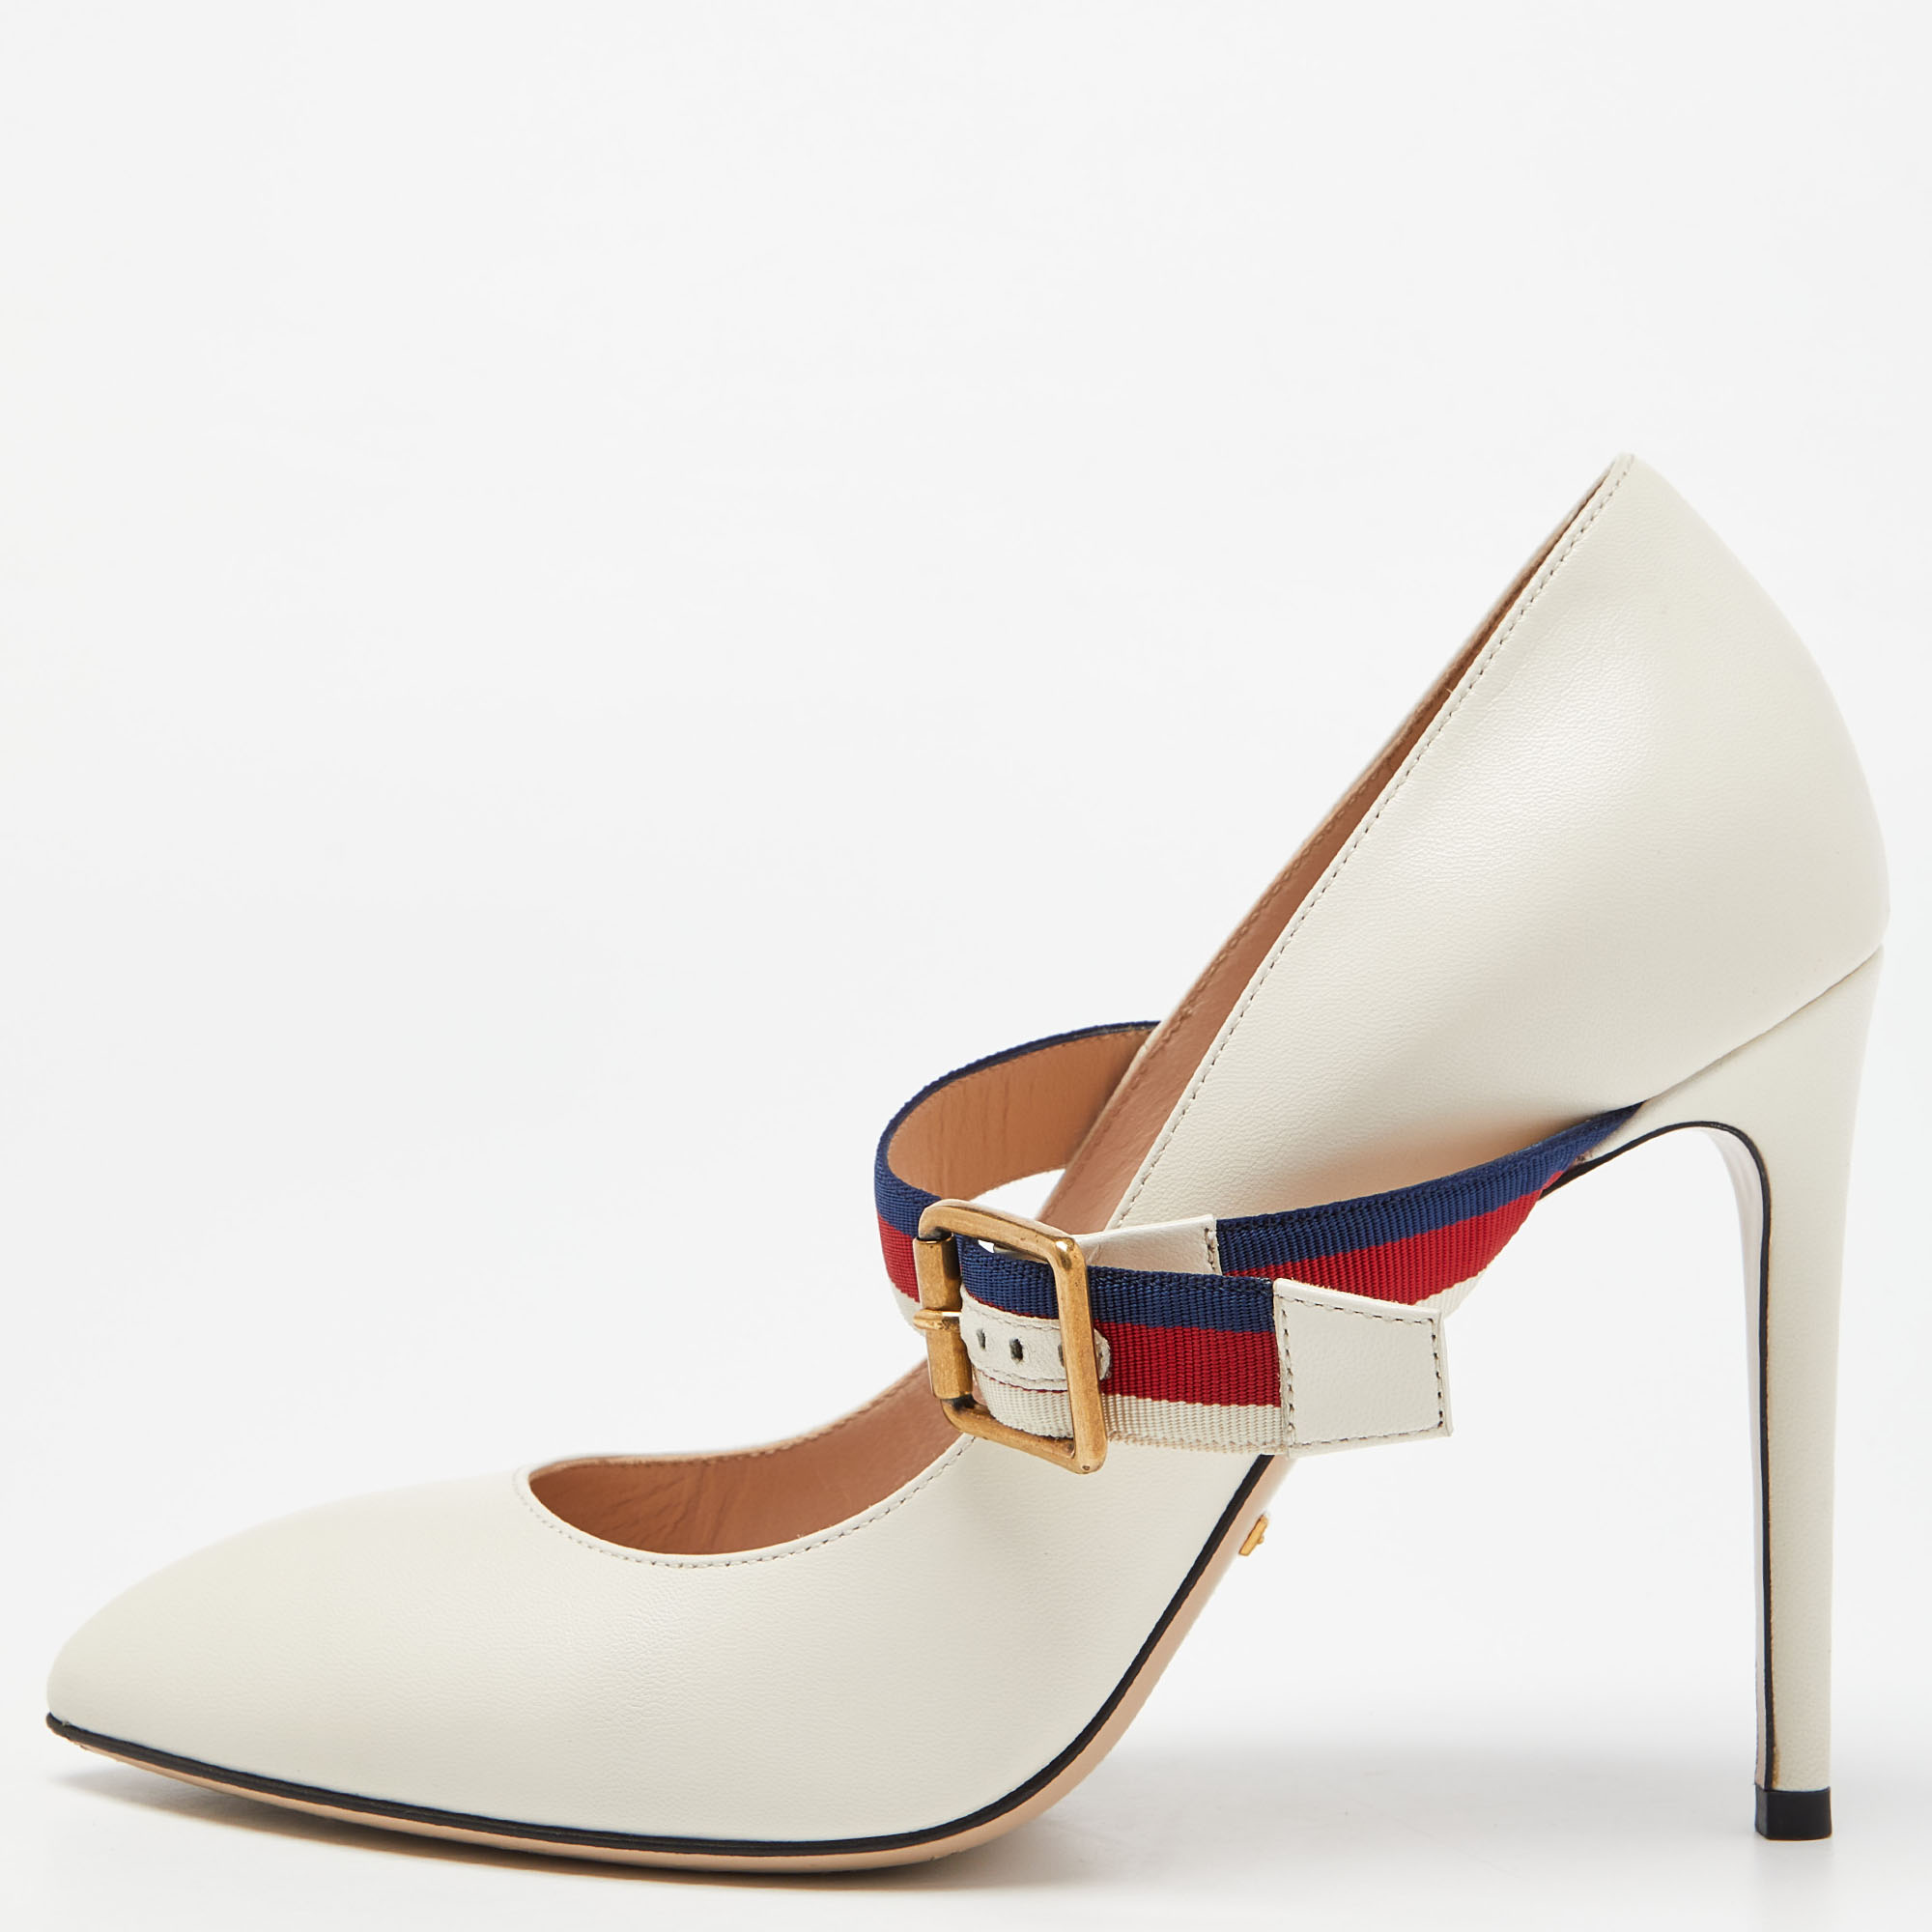 Pre-owned Gucci Cream Leather Sylvie Mary Jane Pumps Size 38.5